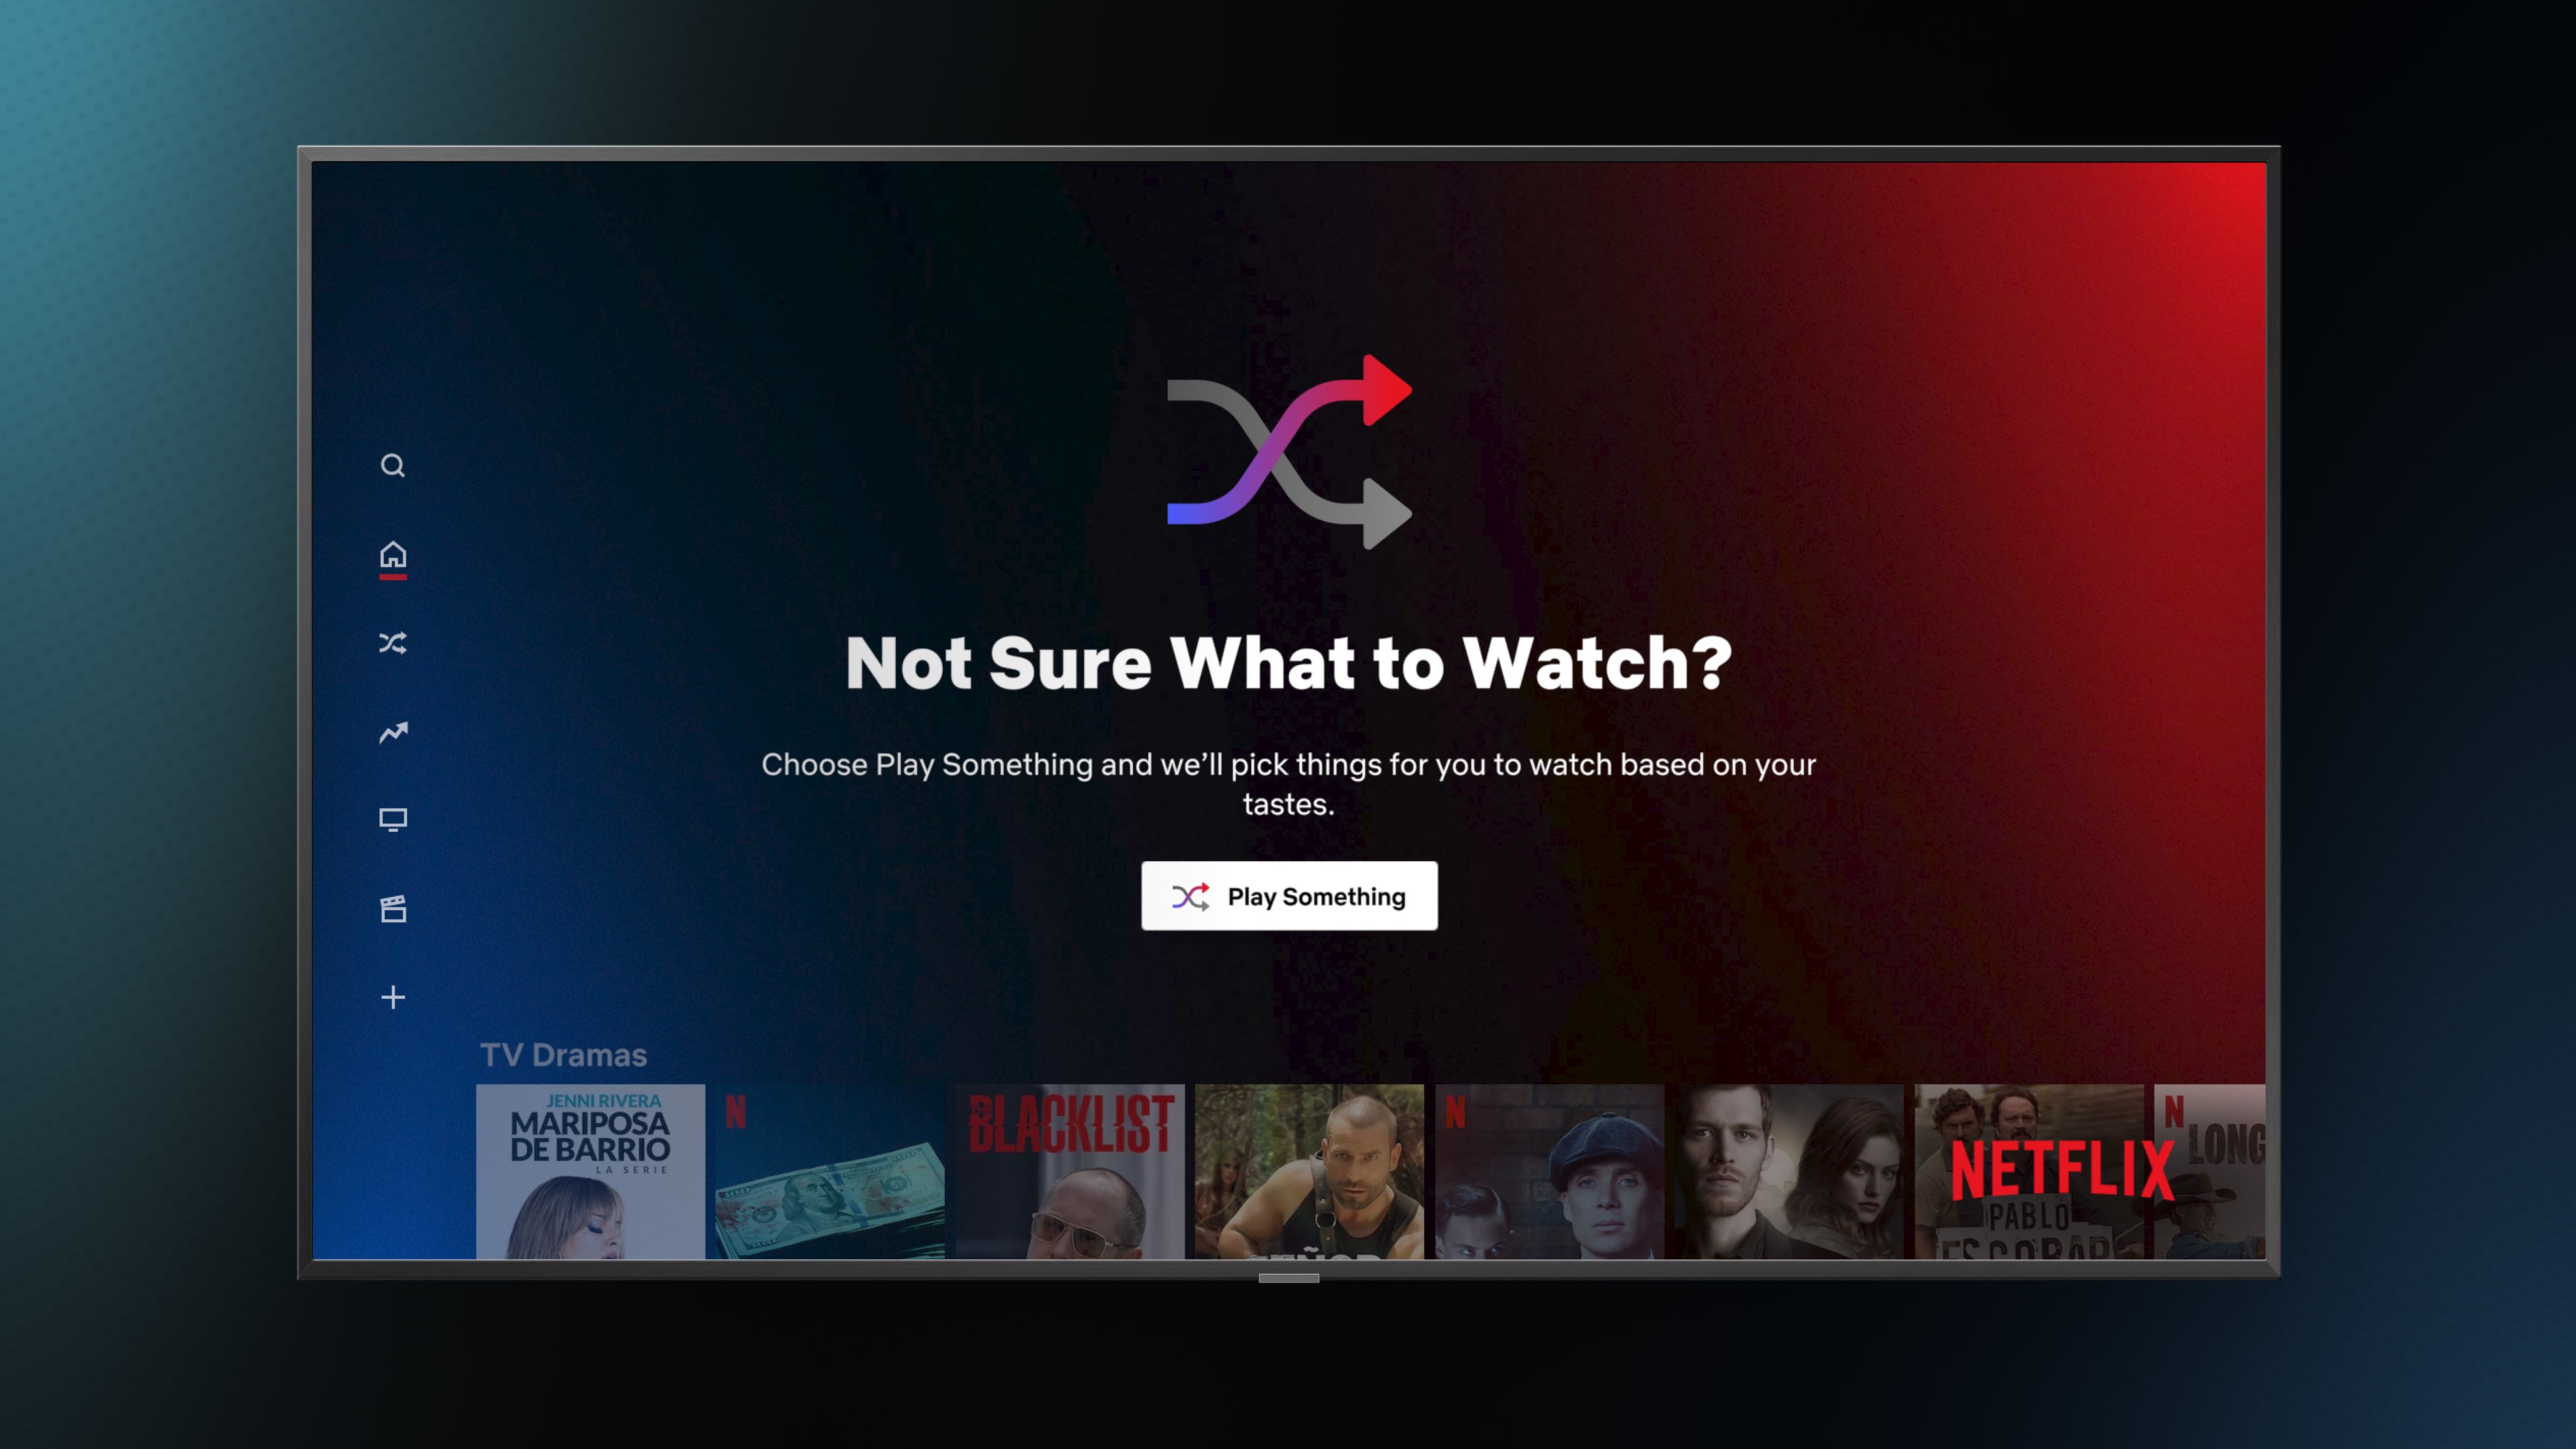 Promotional graphics showing the Play Something feature on Netflix